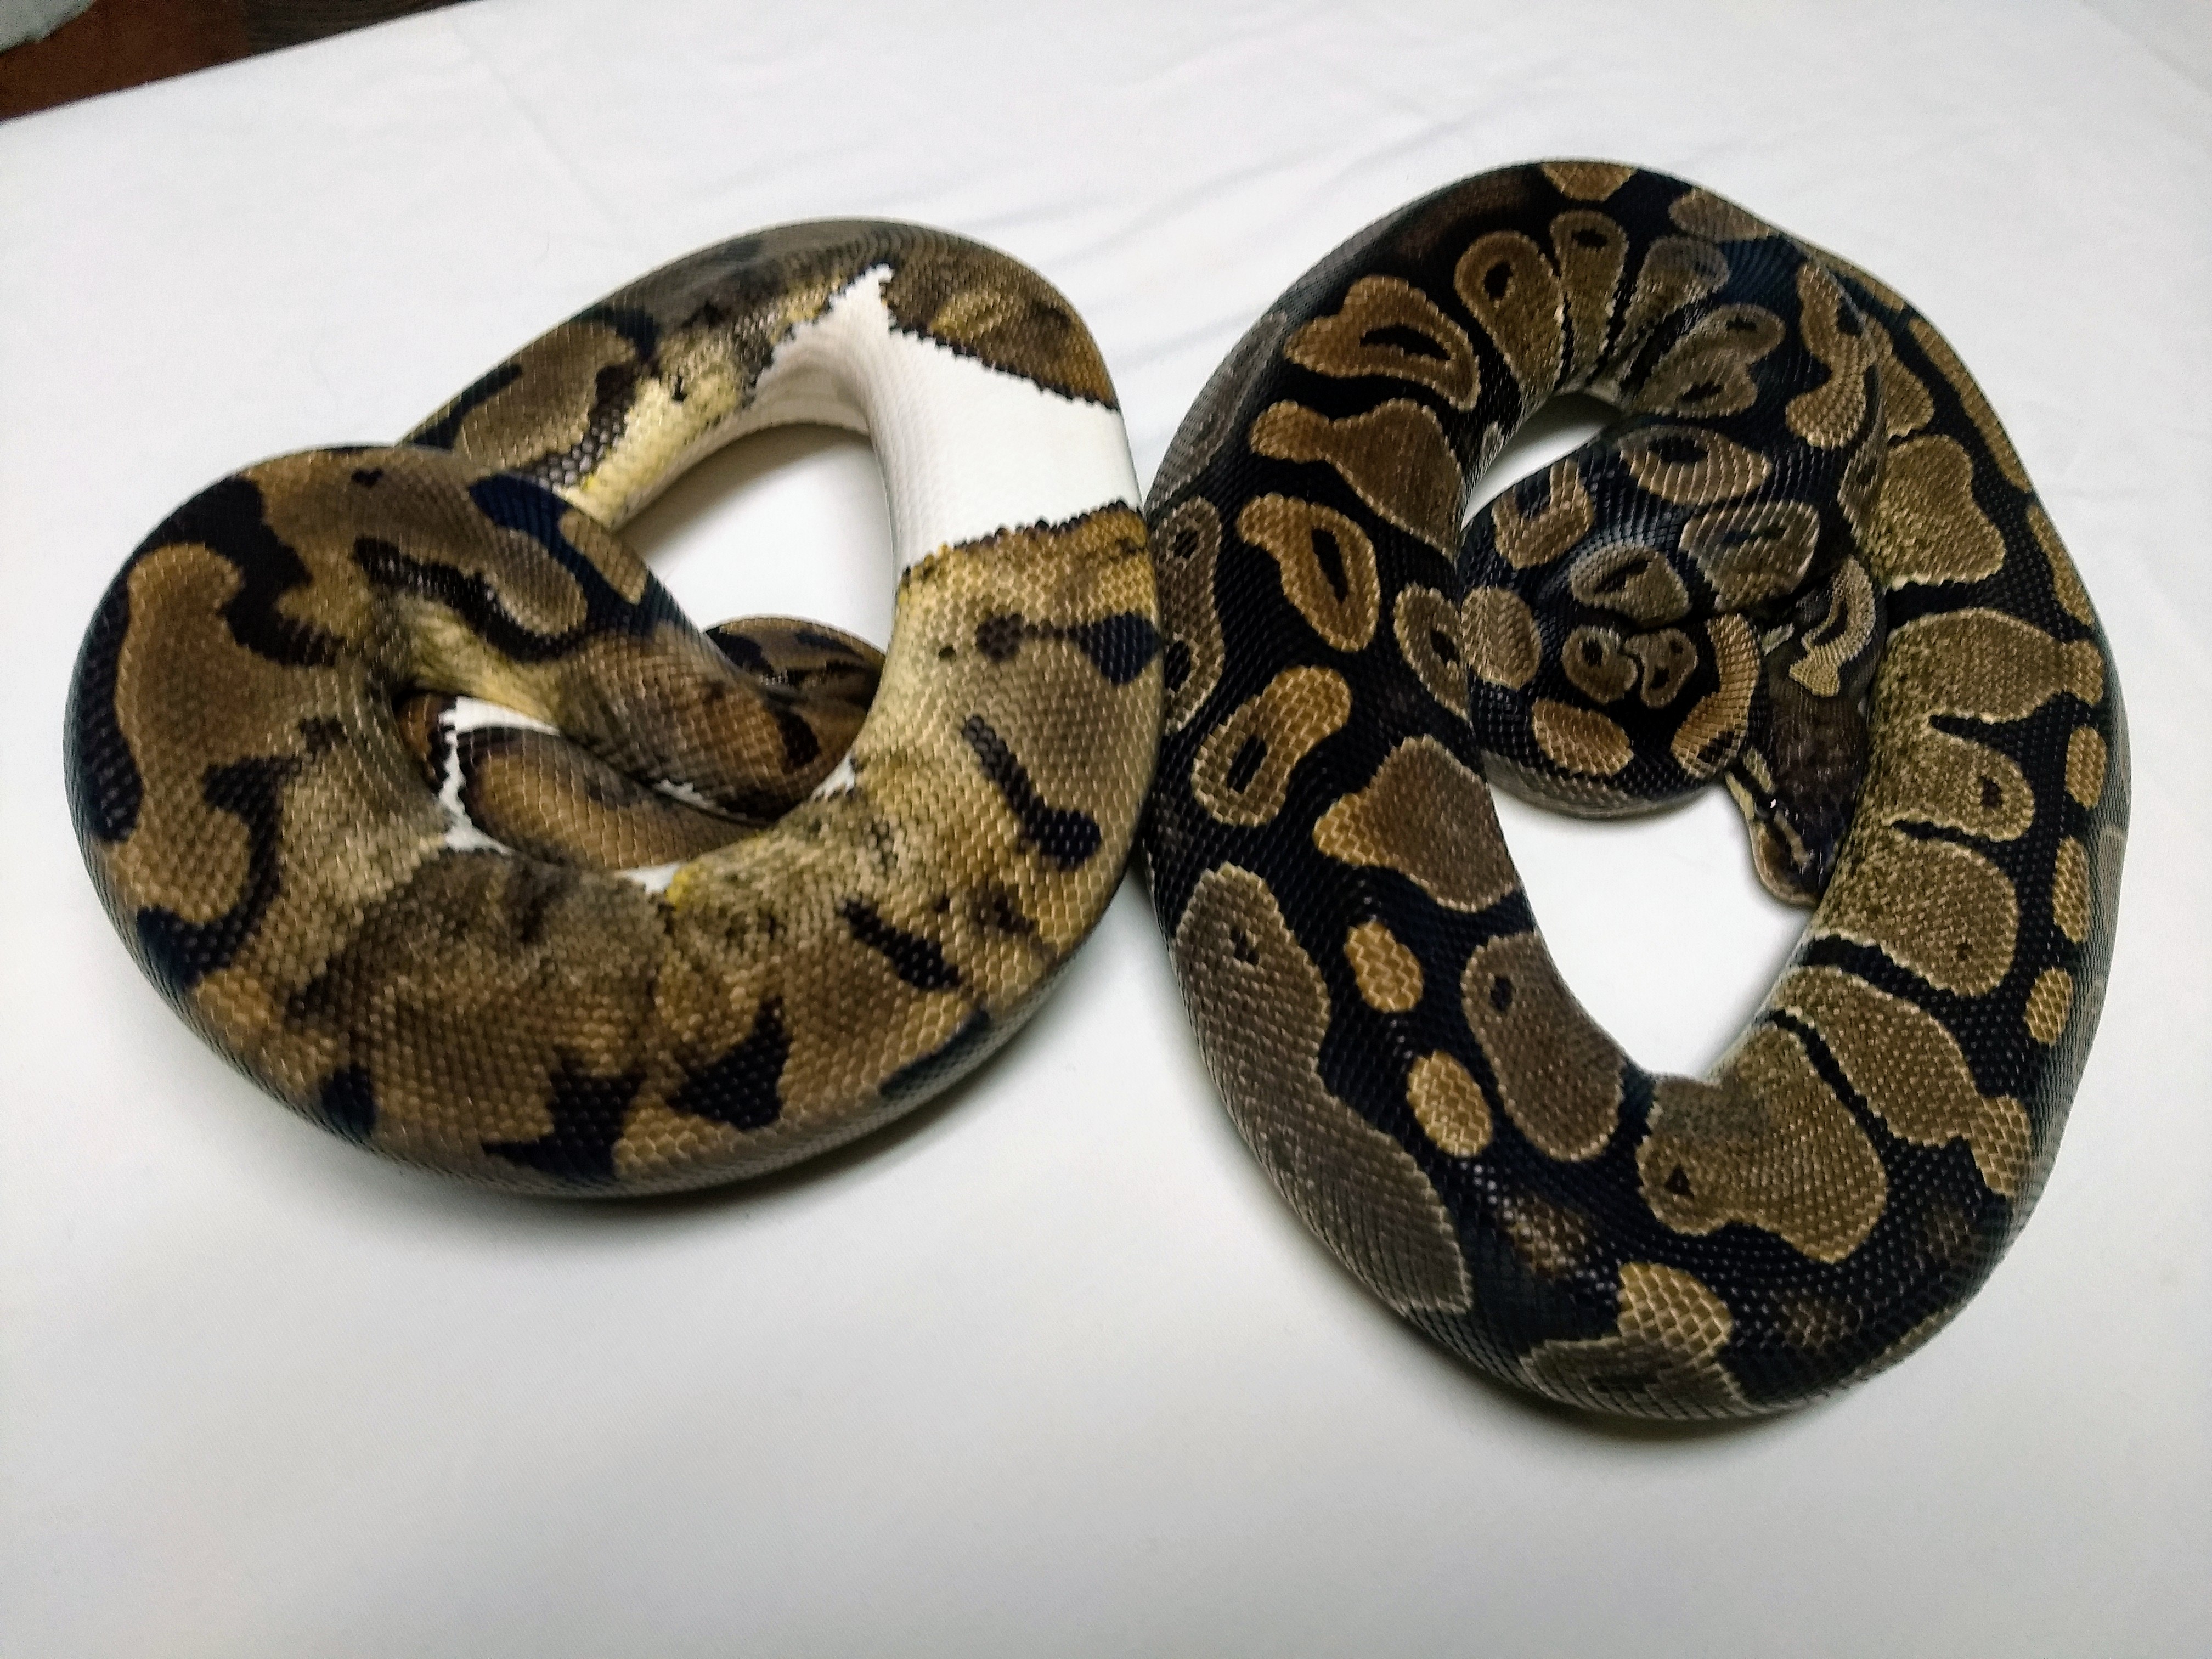 Piebald next to a Normal Ball Python By alpinereptiles